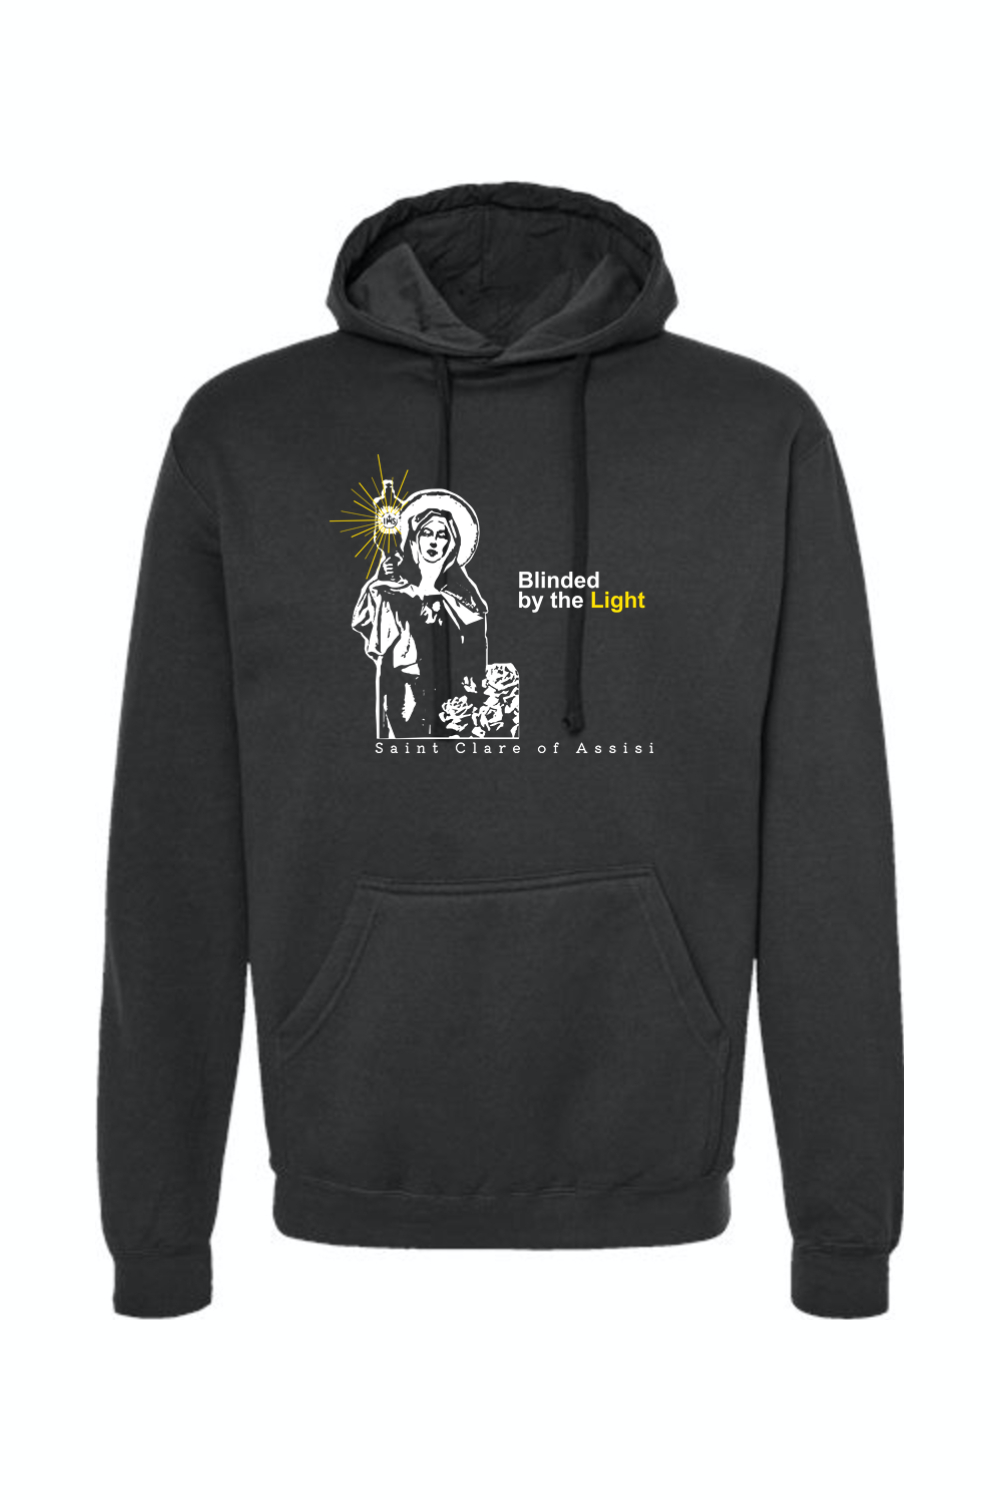 Blinded by the Light- St. Clare of Assisi Hoodie Sweatshirt